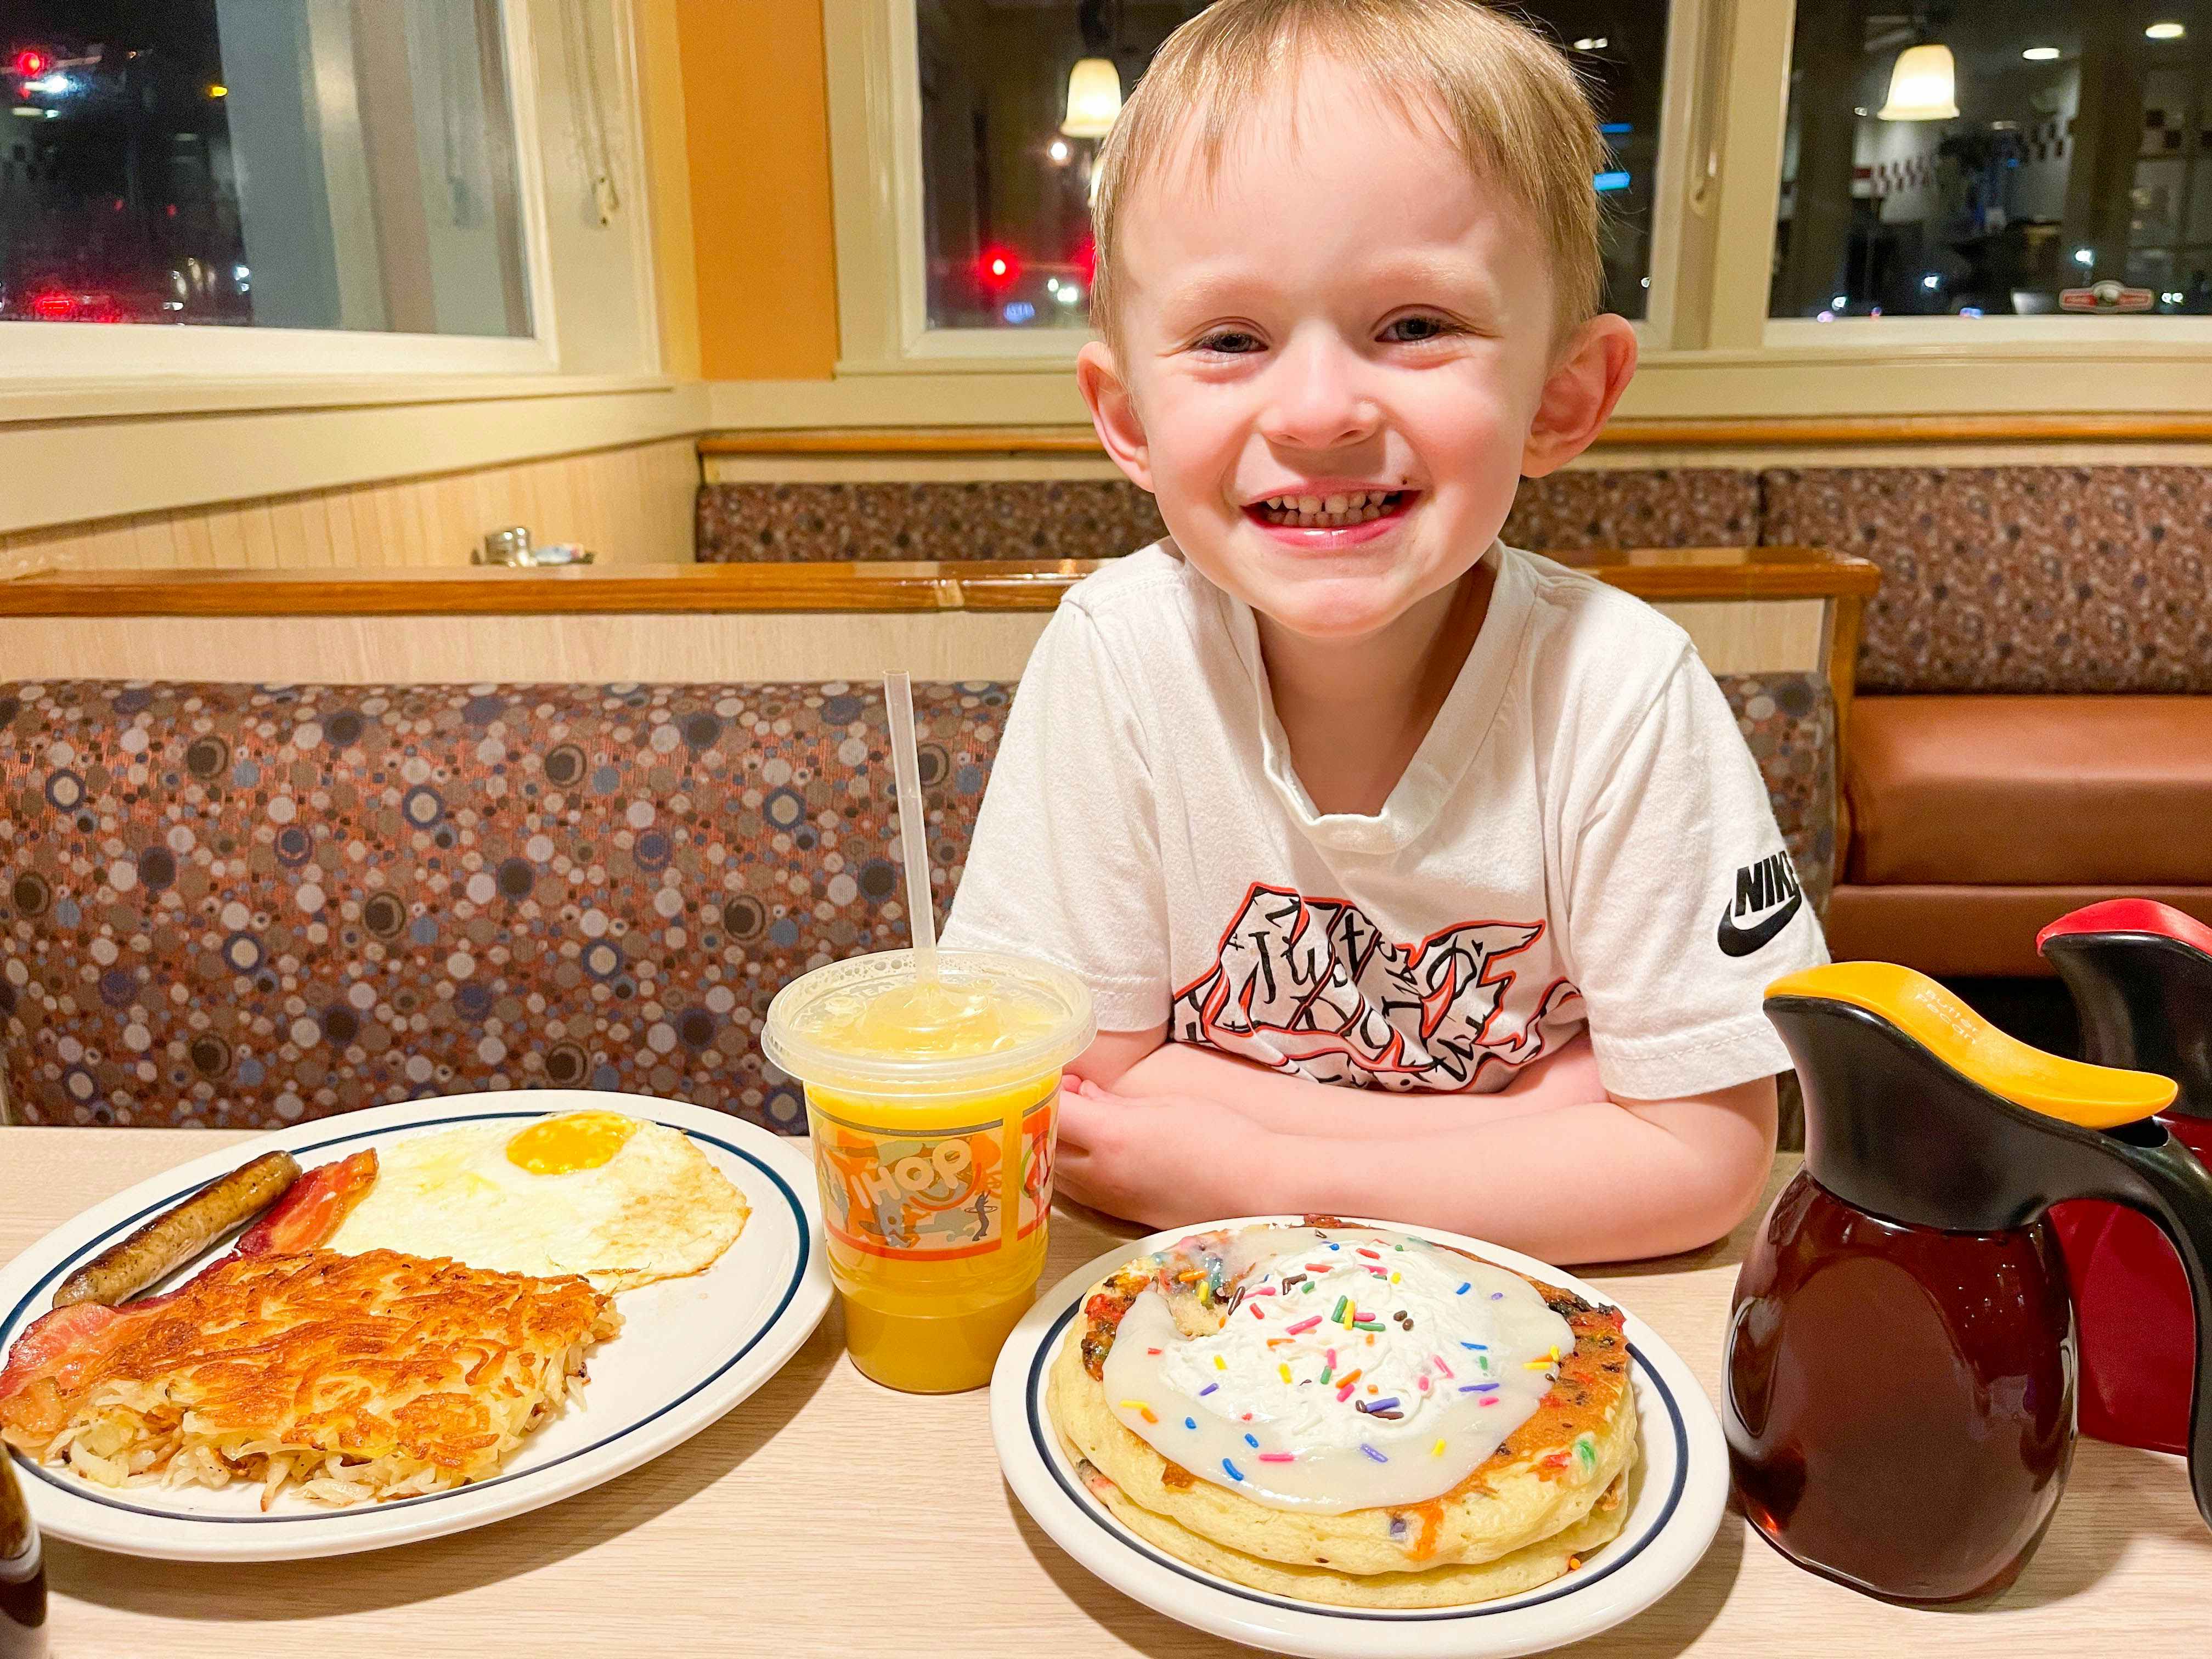 A child smiling and resting their elbows on the table of a booth at iHop. There is a plate of eggs, sausage, and hash browns, a plate of sprinkle pancakes, a kid's drink cup, and a maple syrup pouring jar sitting on the table in front of the child.